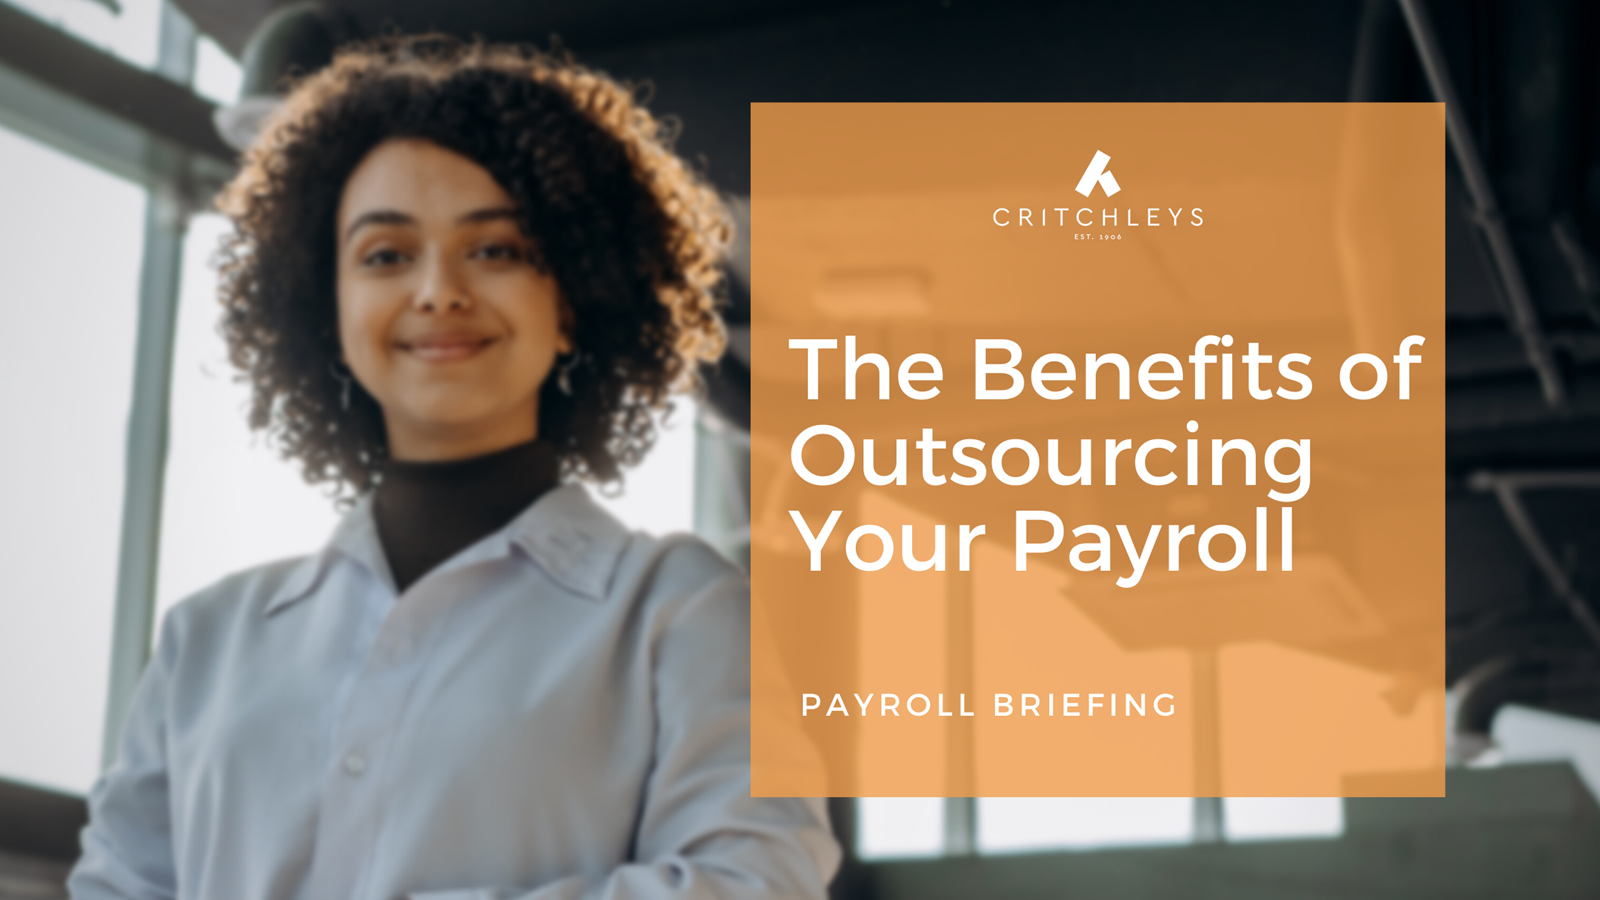 The Benefits of Outsourcing Your Payroll